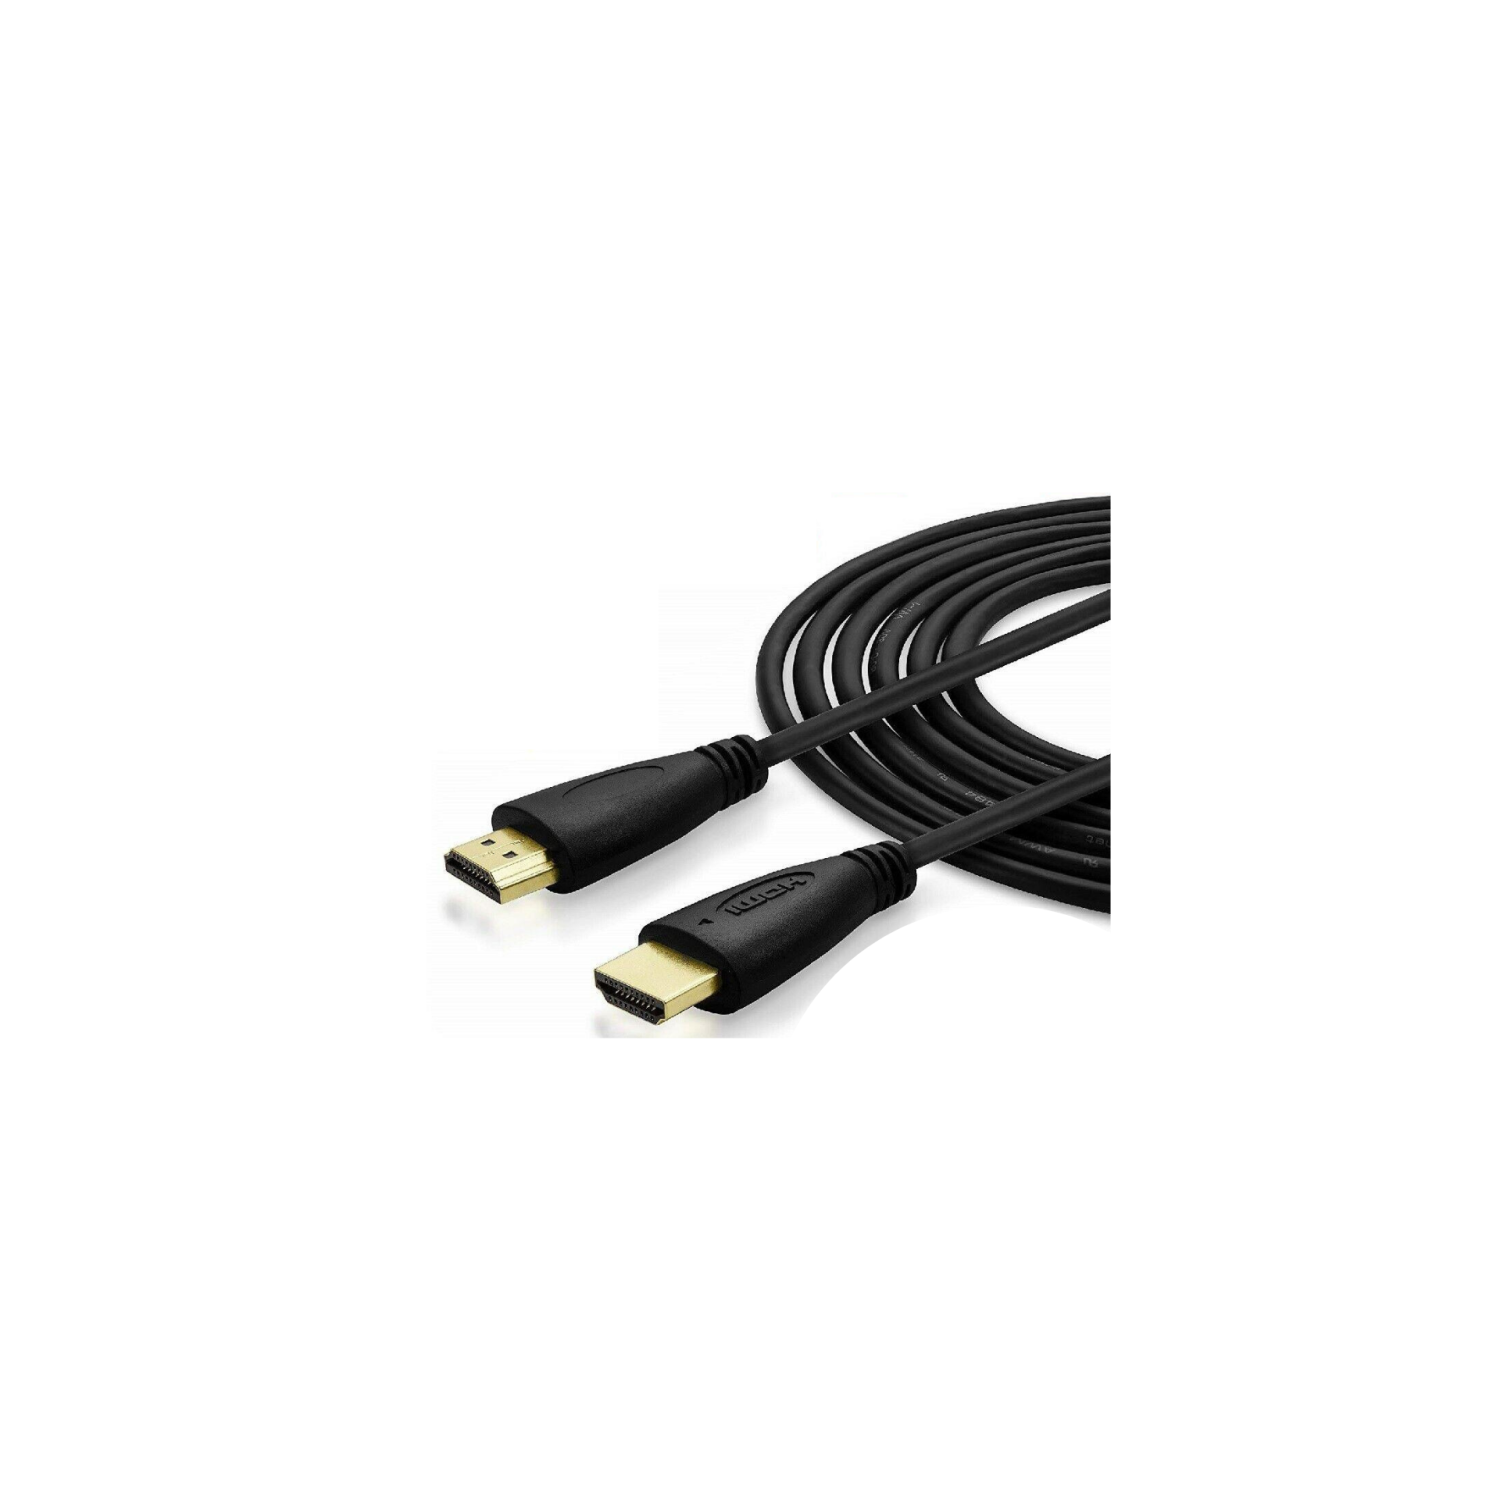 HDMI Cable Full HD 1080p For TV PS4 PS3 Xbox One Blu-Ray Monitor PC Computer